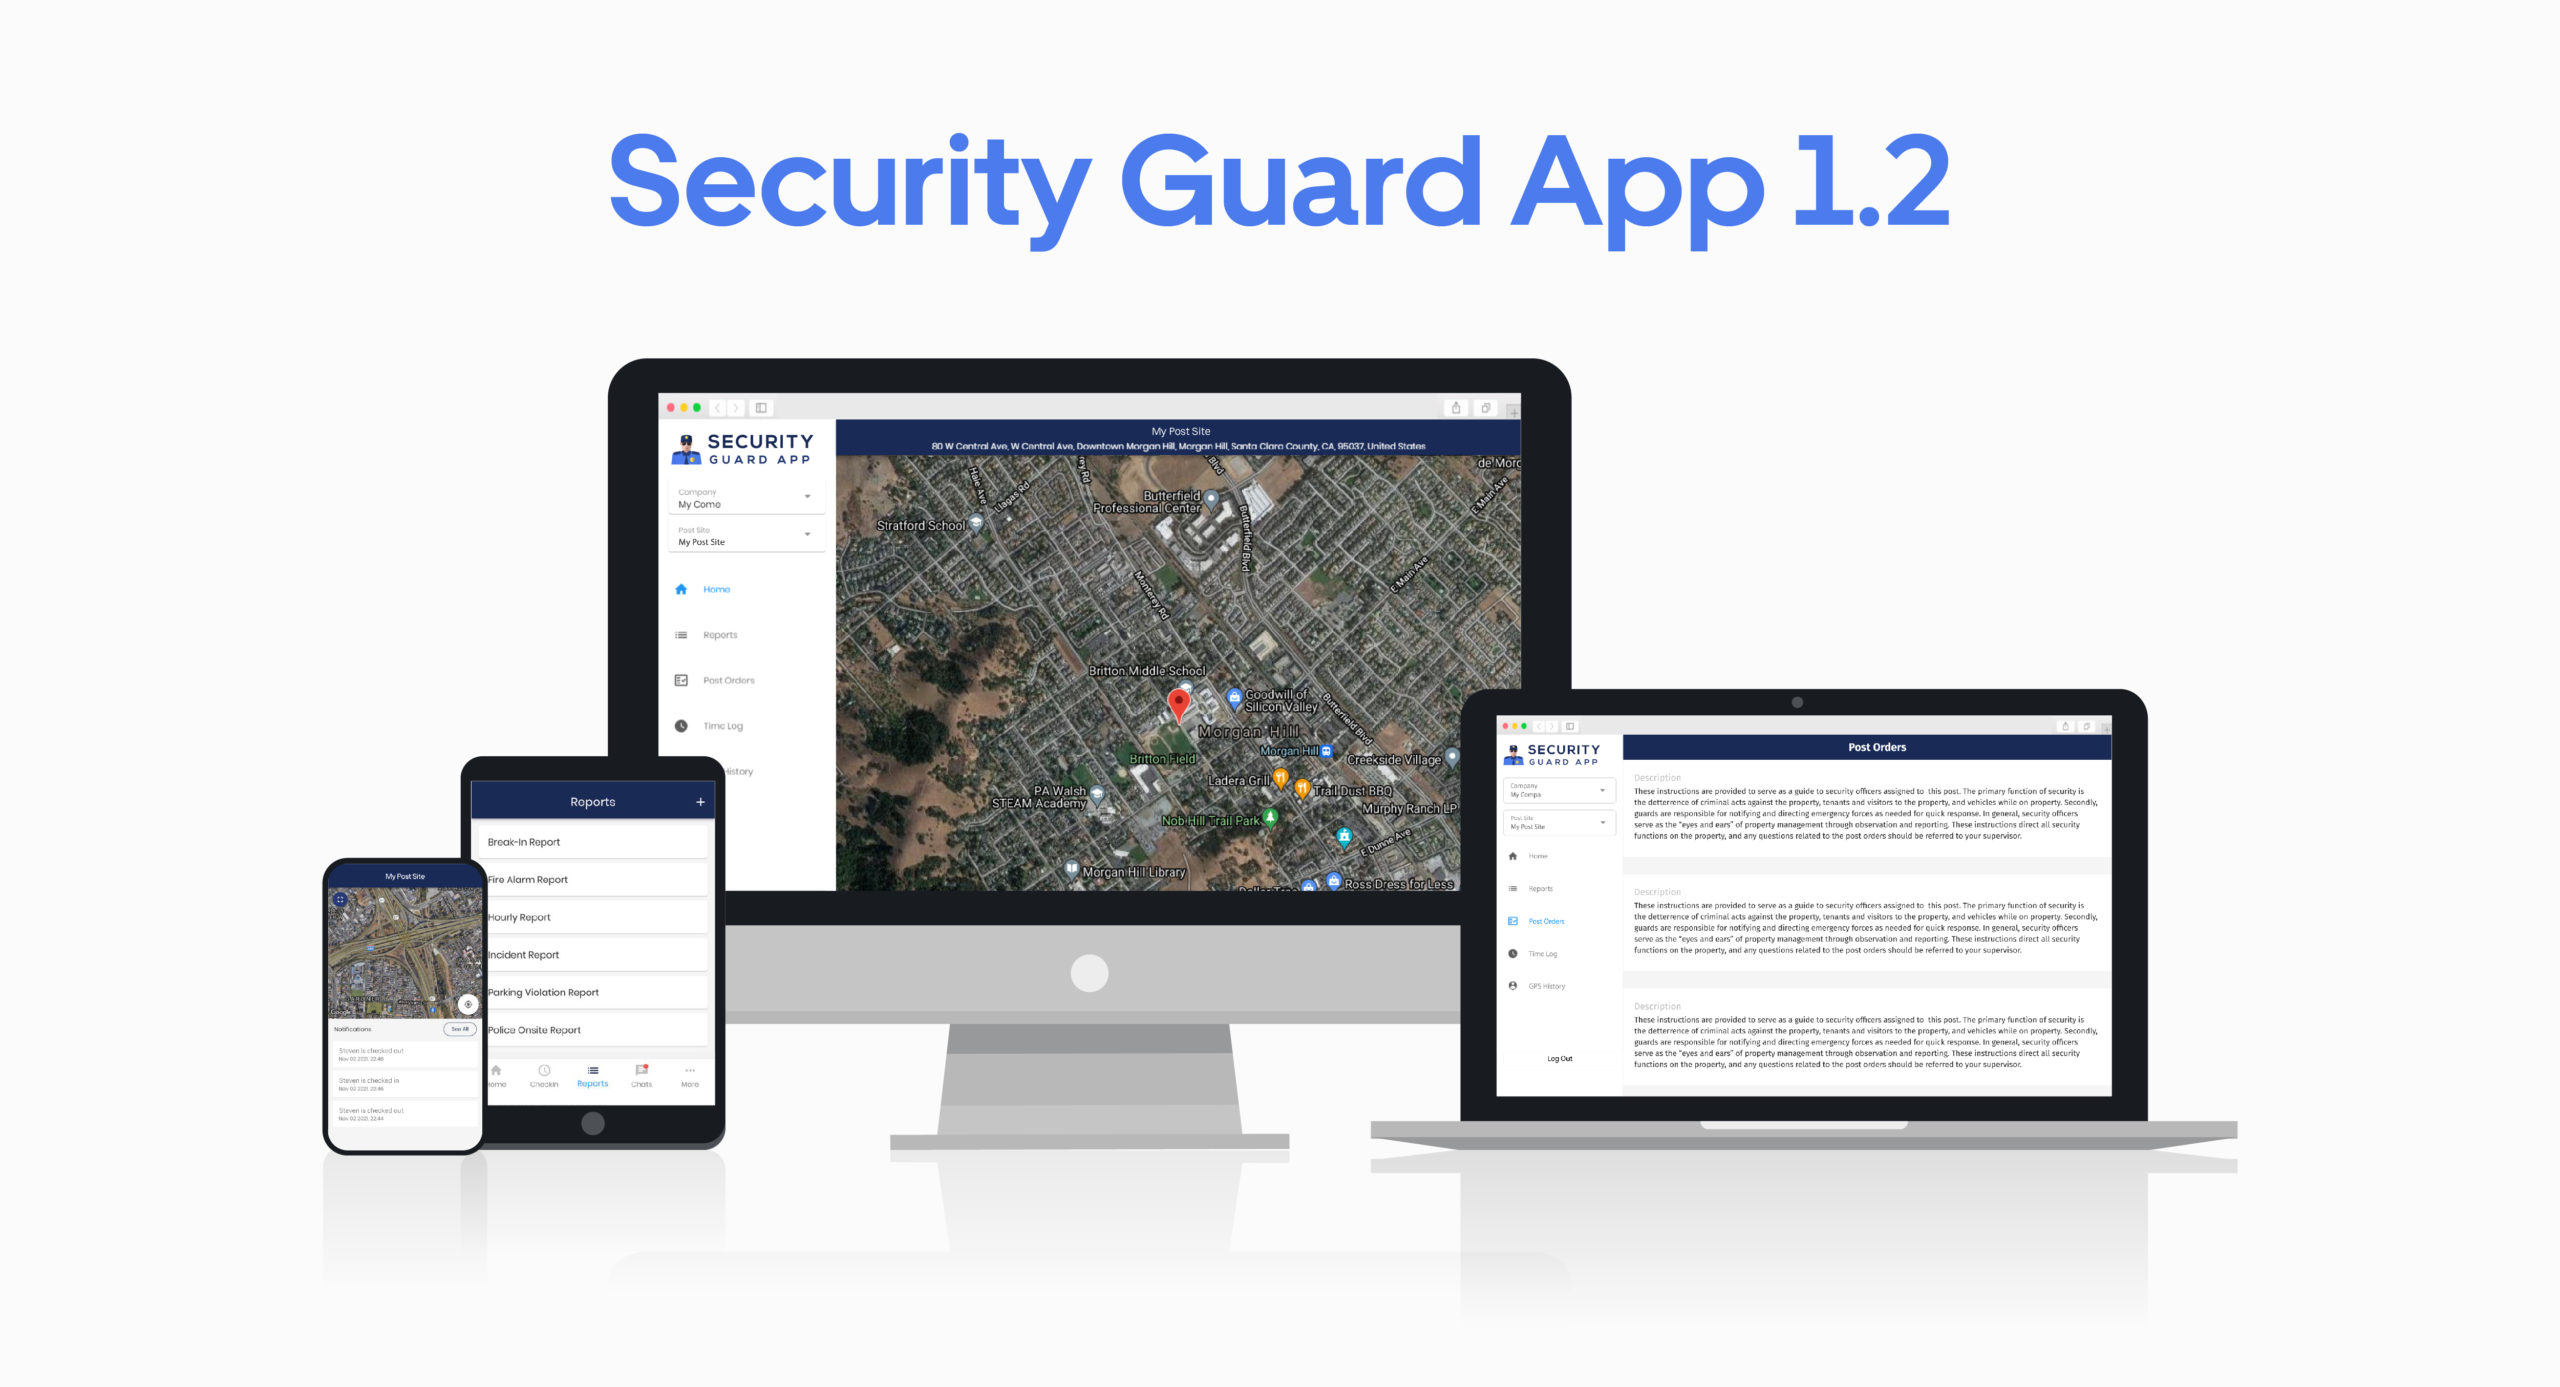 Introducing Security Guard App 1.2 – Now With The Web App